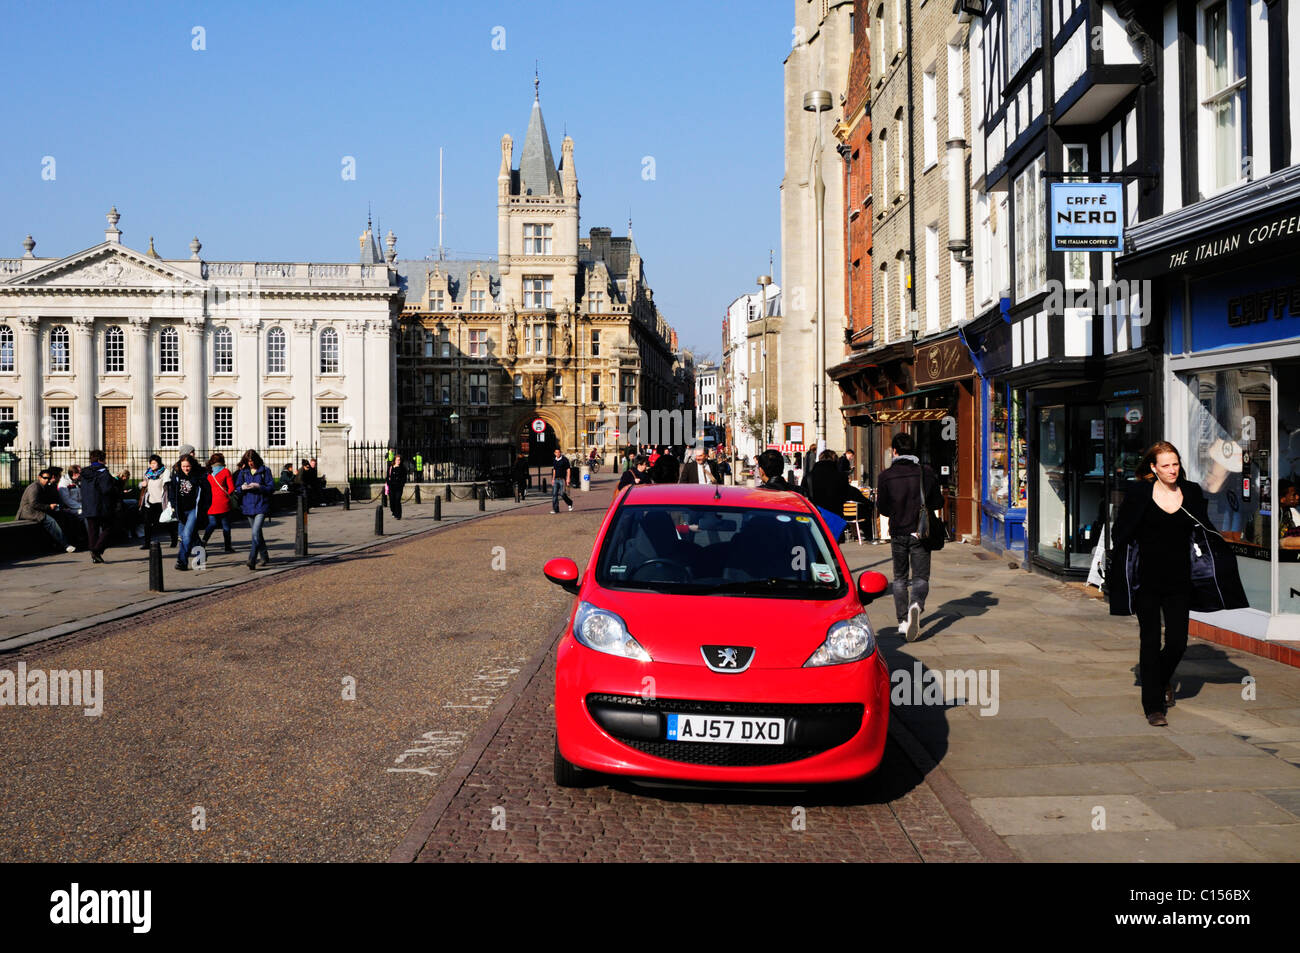 Street Scene in Kings Parade, looking towards The Senate House and Gonville and Caius College, Cambridge, England, UK Stock Photo